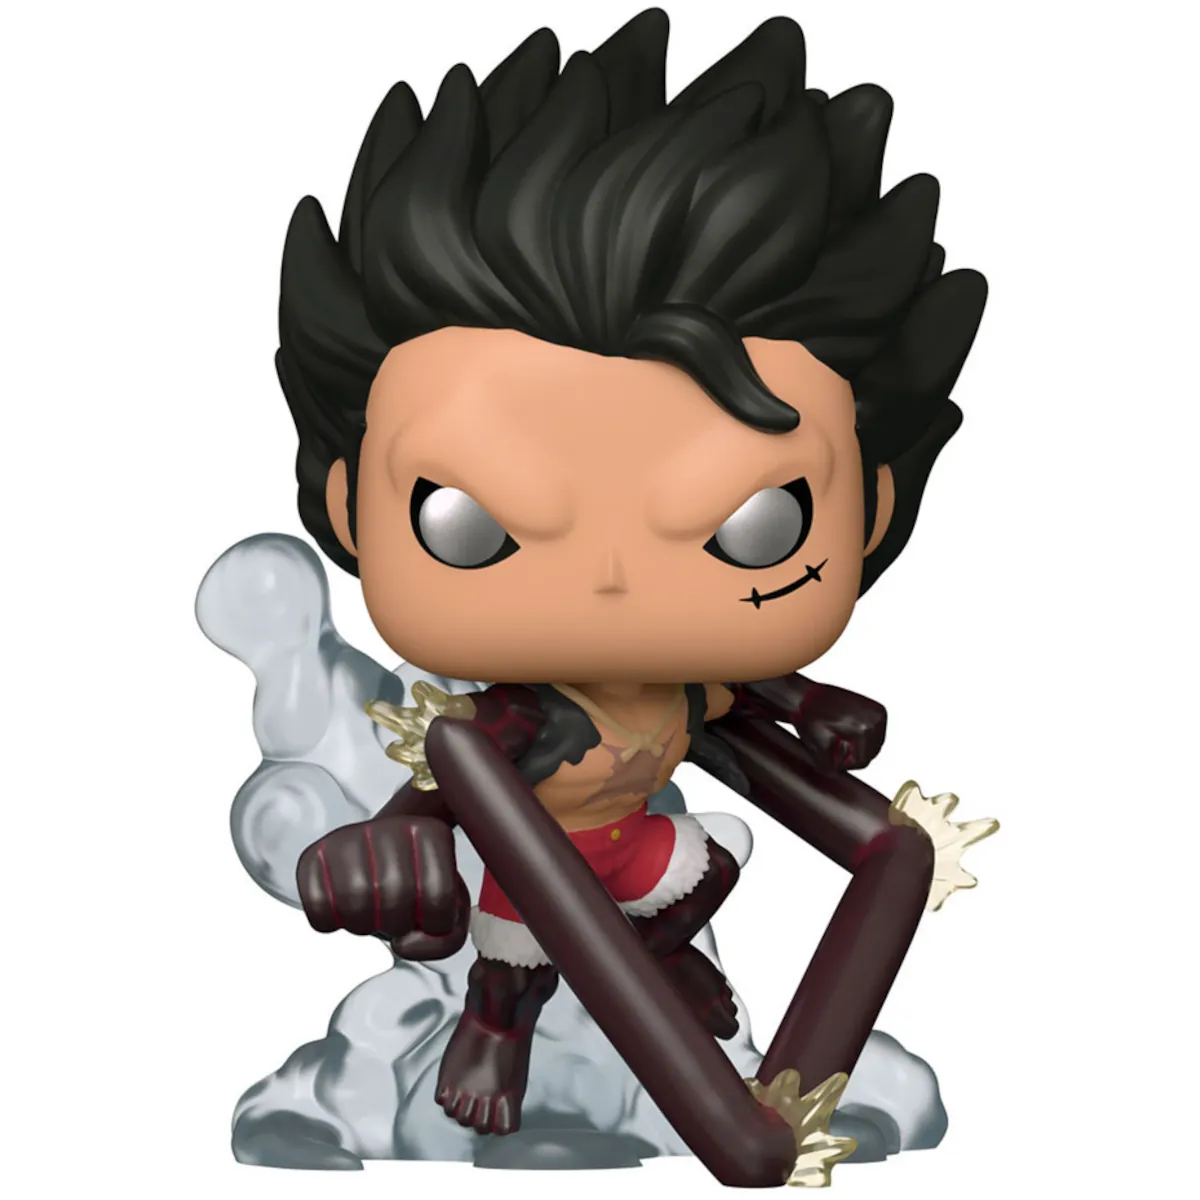 61368 Funko Pop! Animation - One Piece - Snake-Man Luffy Collectable Vinyl Figure